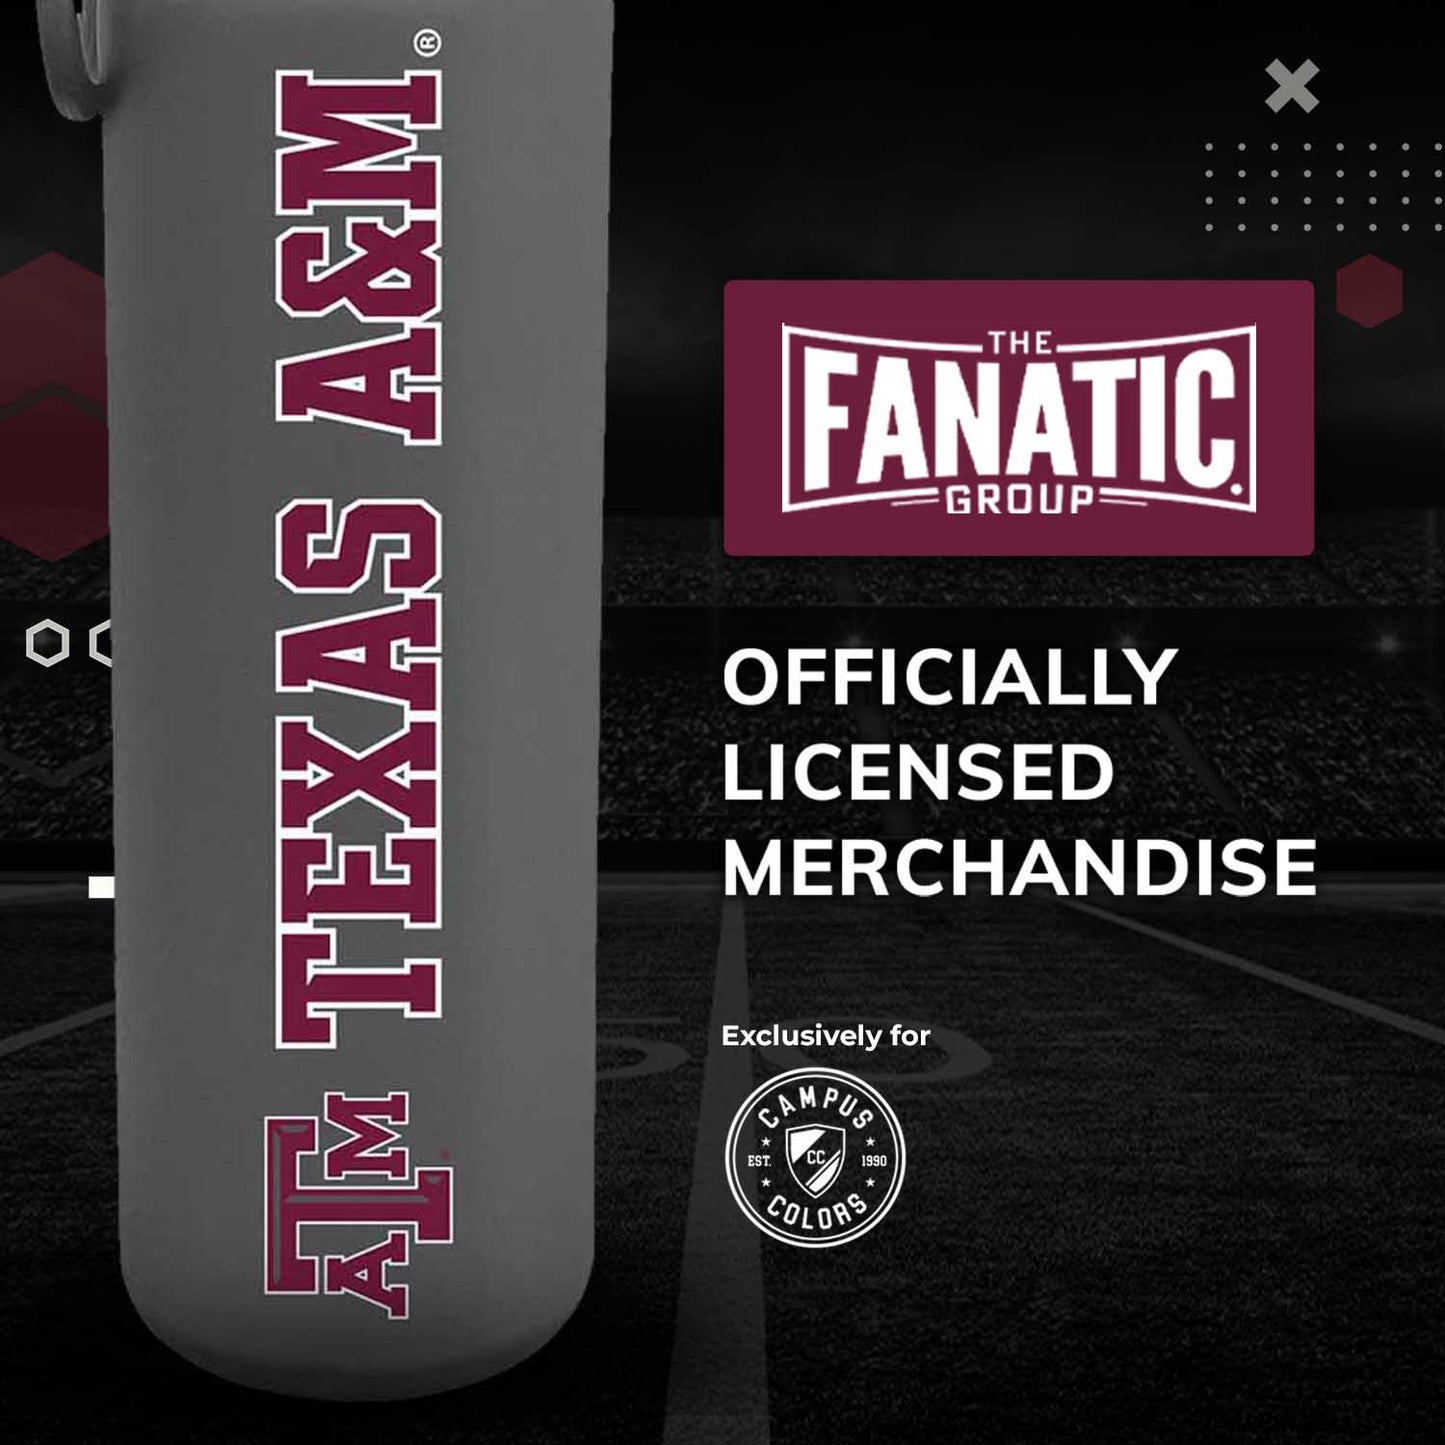 Texas A&M Aggies NCAA Stainless Steel Water Bottle - Sport Gray